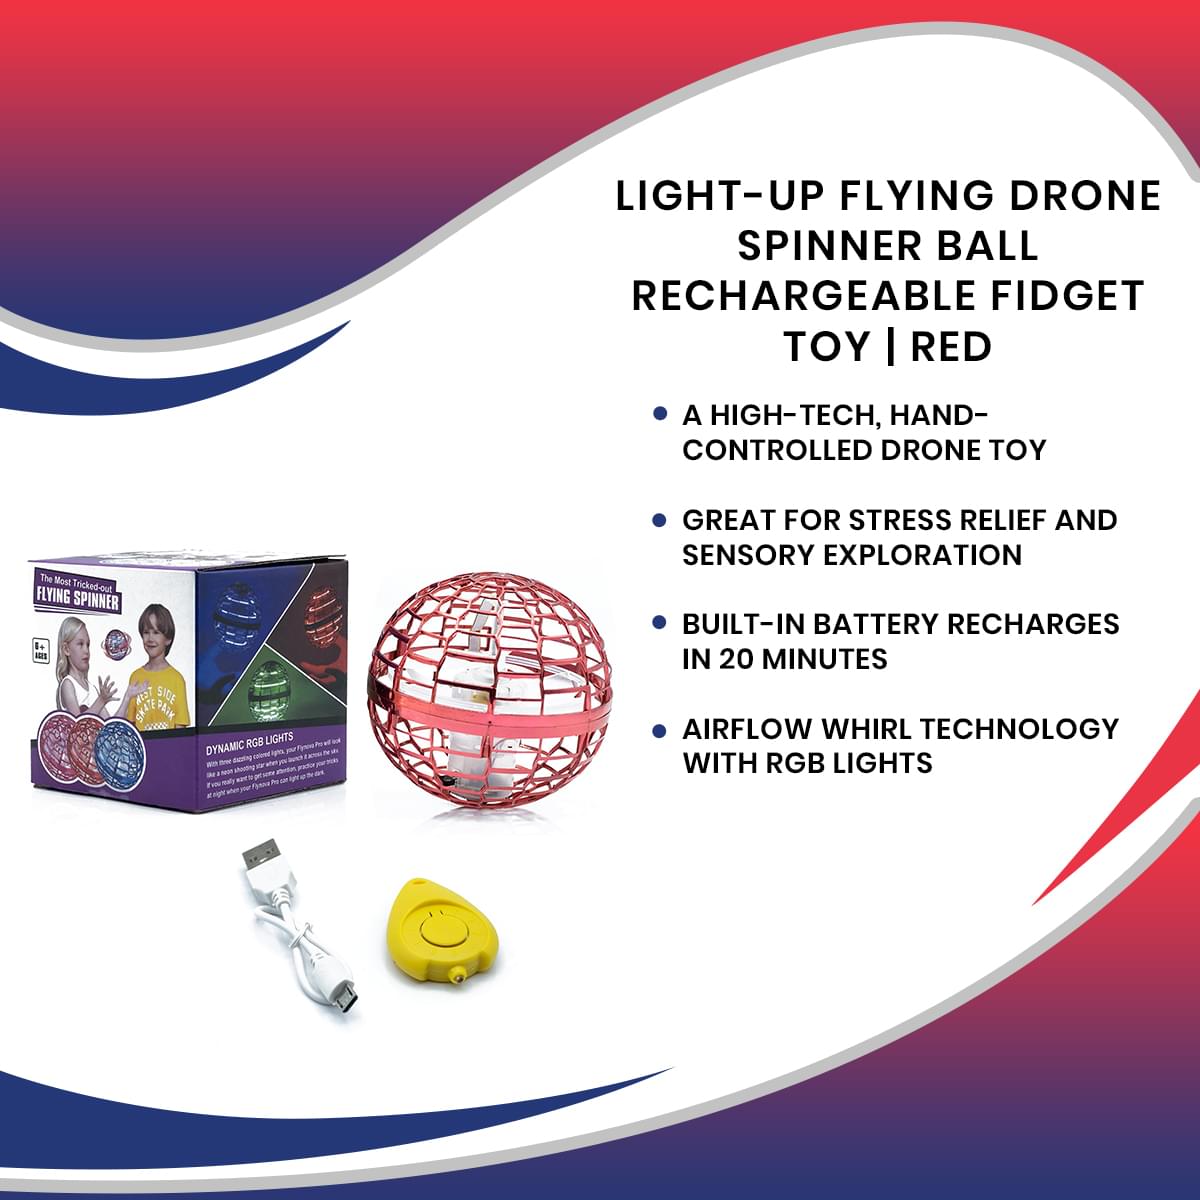 Light-Up Flying Drone Spinner Ball Rechargeable Fidget Toy | Red